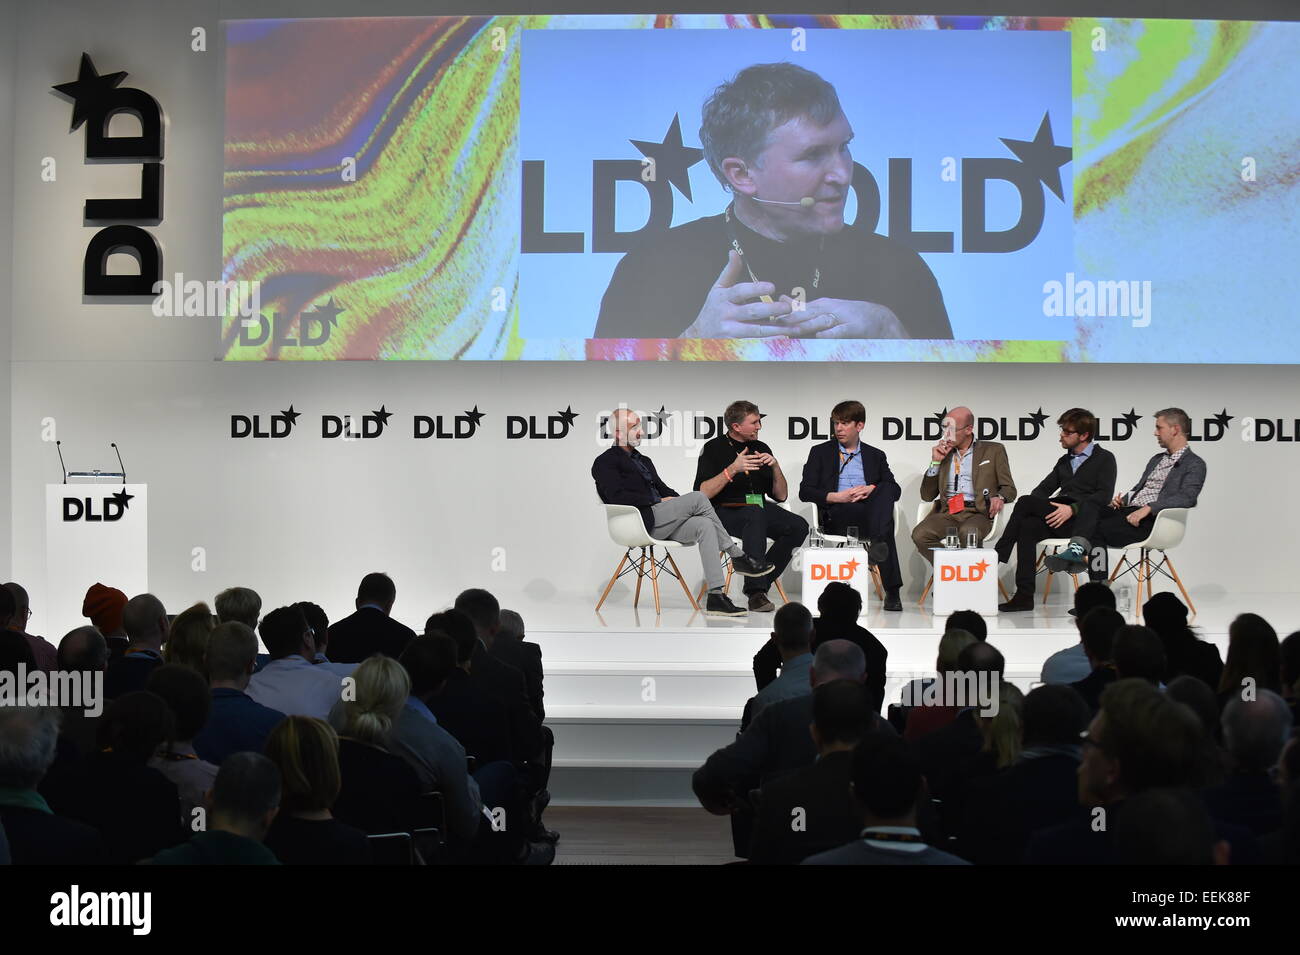 MUNICH/GERMANY - JANUARY 19: Gadi Amit (New Deal Design), Brady Forrest (PCH), Nial Murphy (Evrything), Roman Friedrich (Strategy&), Lars Hinrichs (Cinco Capital) sit togethert on the podium during the DLD15 (Digital-Life-Design) Conference at the HVB Forum on January 19, 2015 in Munich, Germany. DLD is a global network of innovation, digitization, science and culture, which connects business, creative and social leaders, opinion formers and influencers for crossover conversation and inspiration.(Photo: picture alliance / Kai-Uwe Wärner)/picture alliance Stock Photo